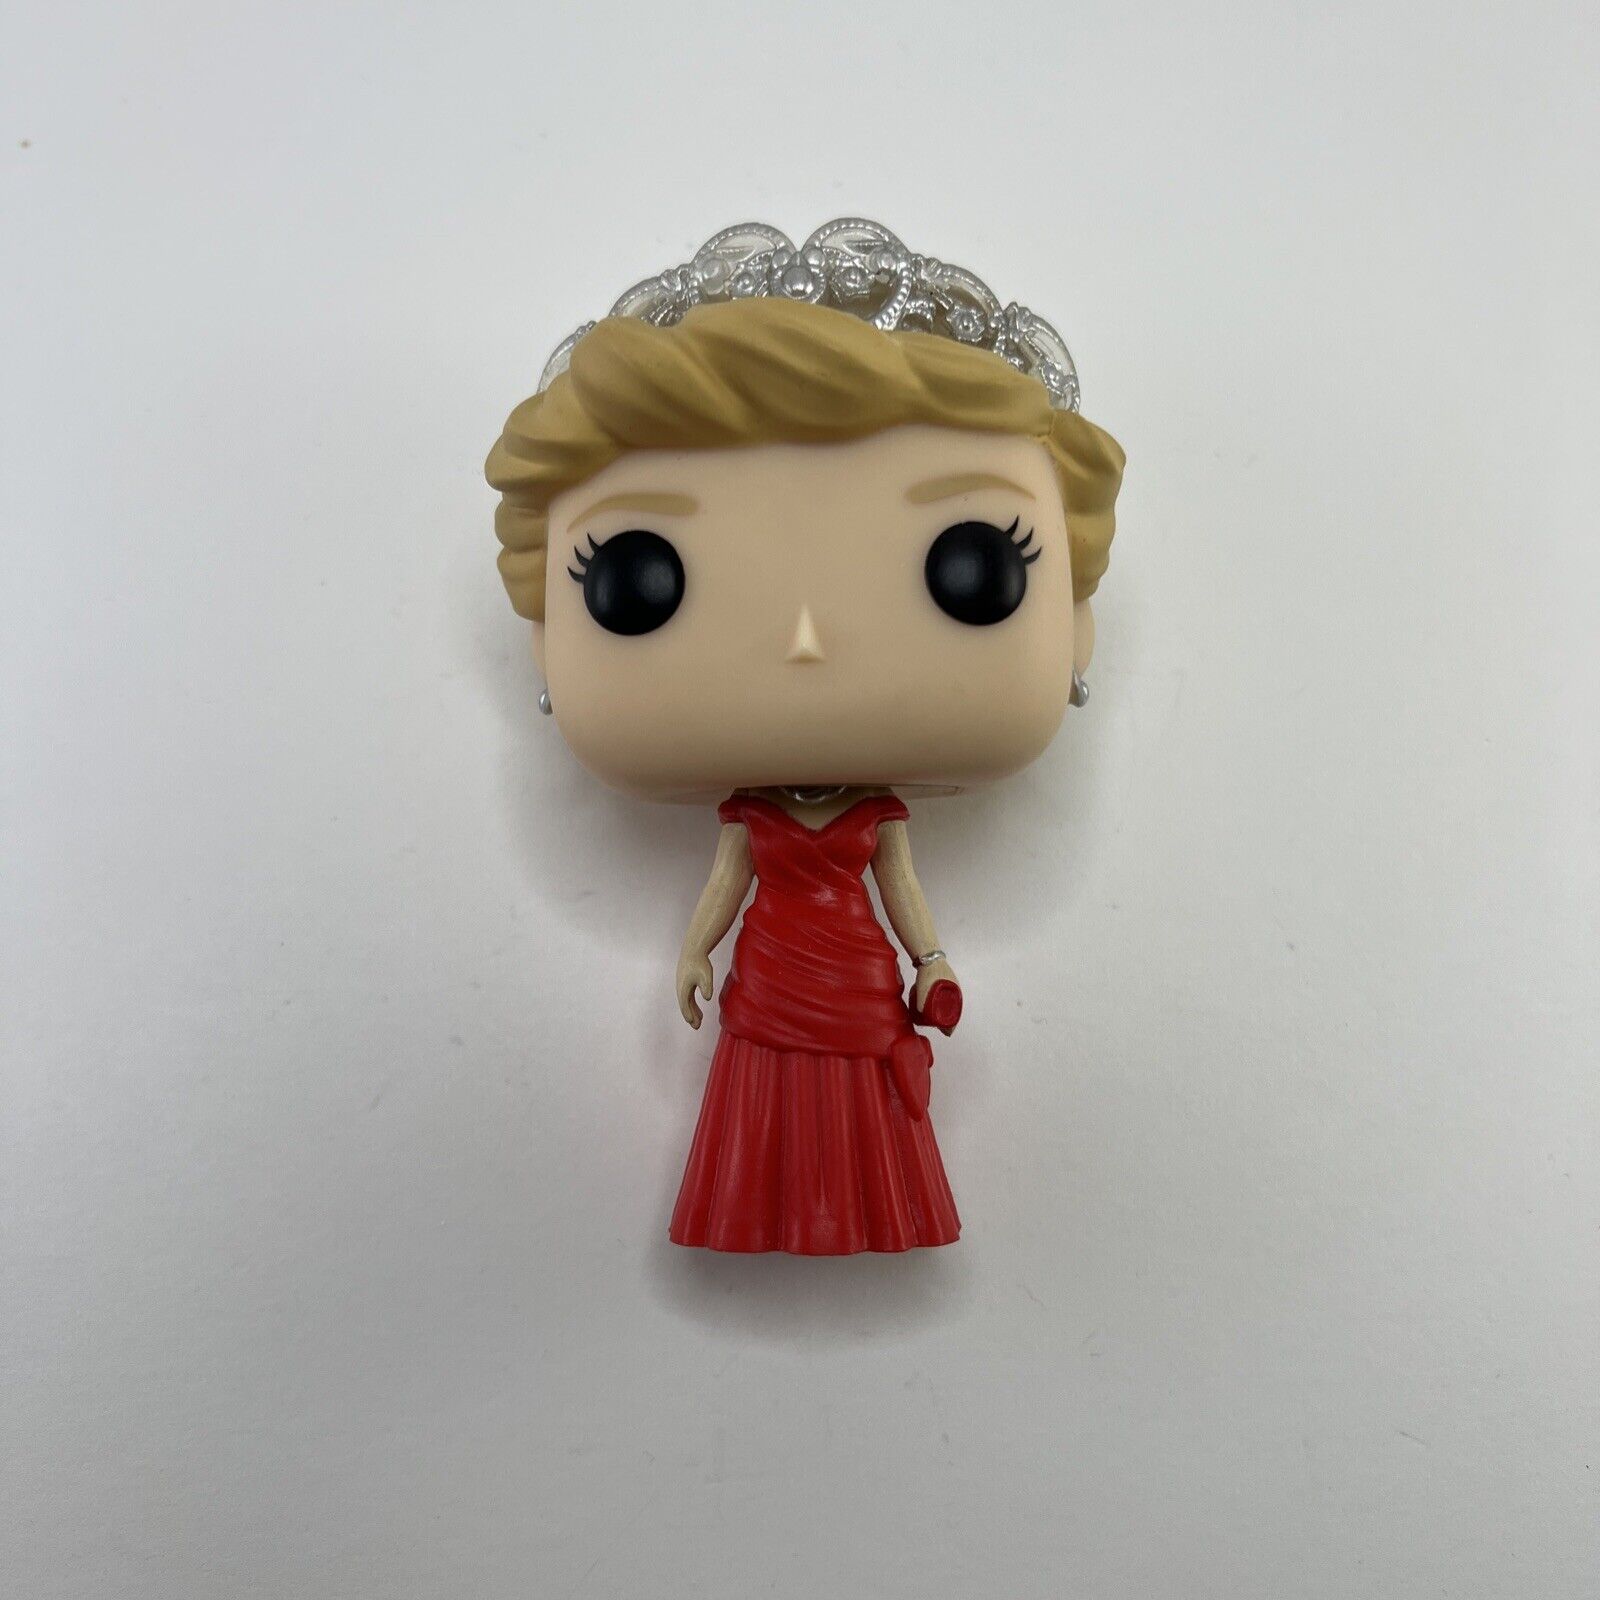 Chase Diana Princess of Wales Funko Pop Vinyl Figure #03 Red Dress Chase